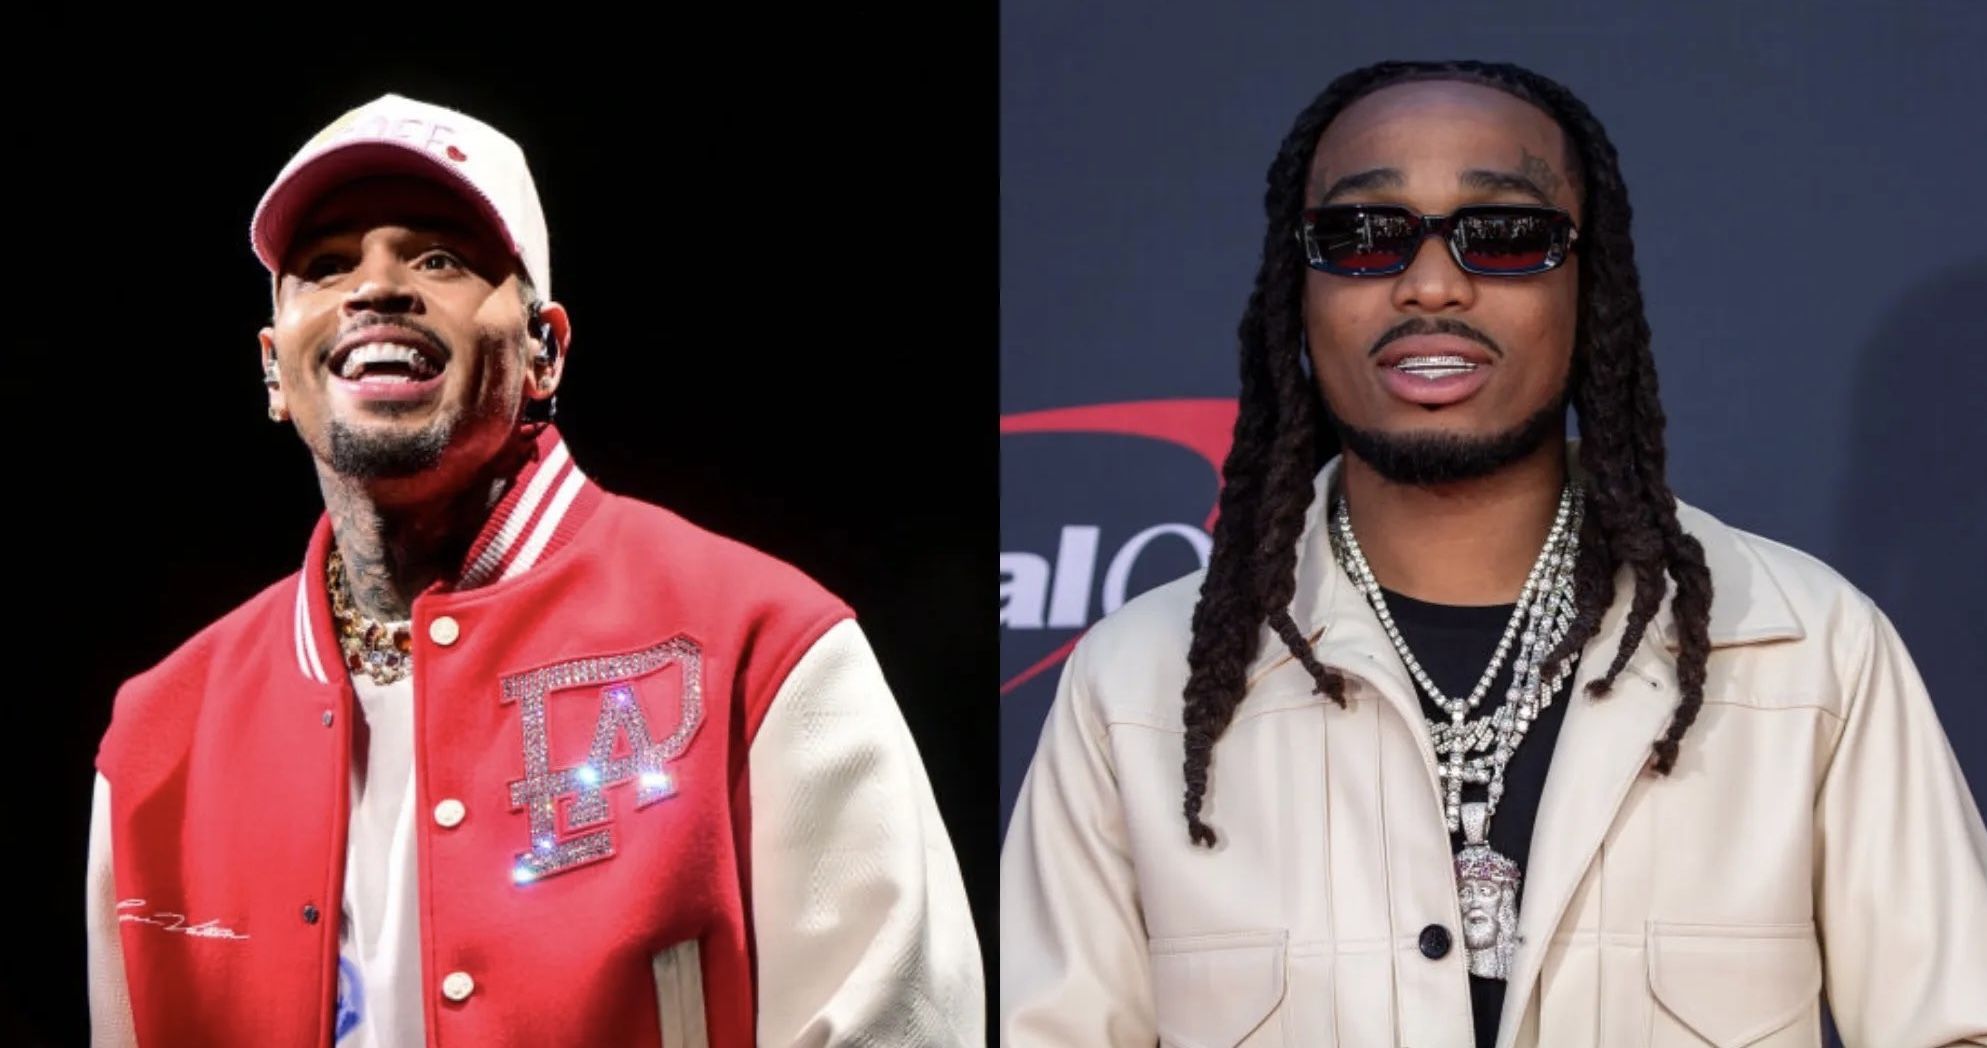 Quavo has fired back at Chris Brown after the latter dissed him on his new album, 11:11 Deluxe. 